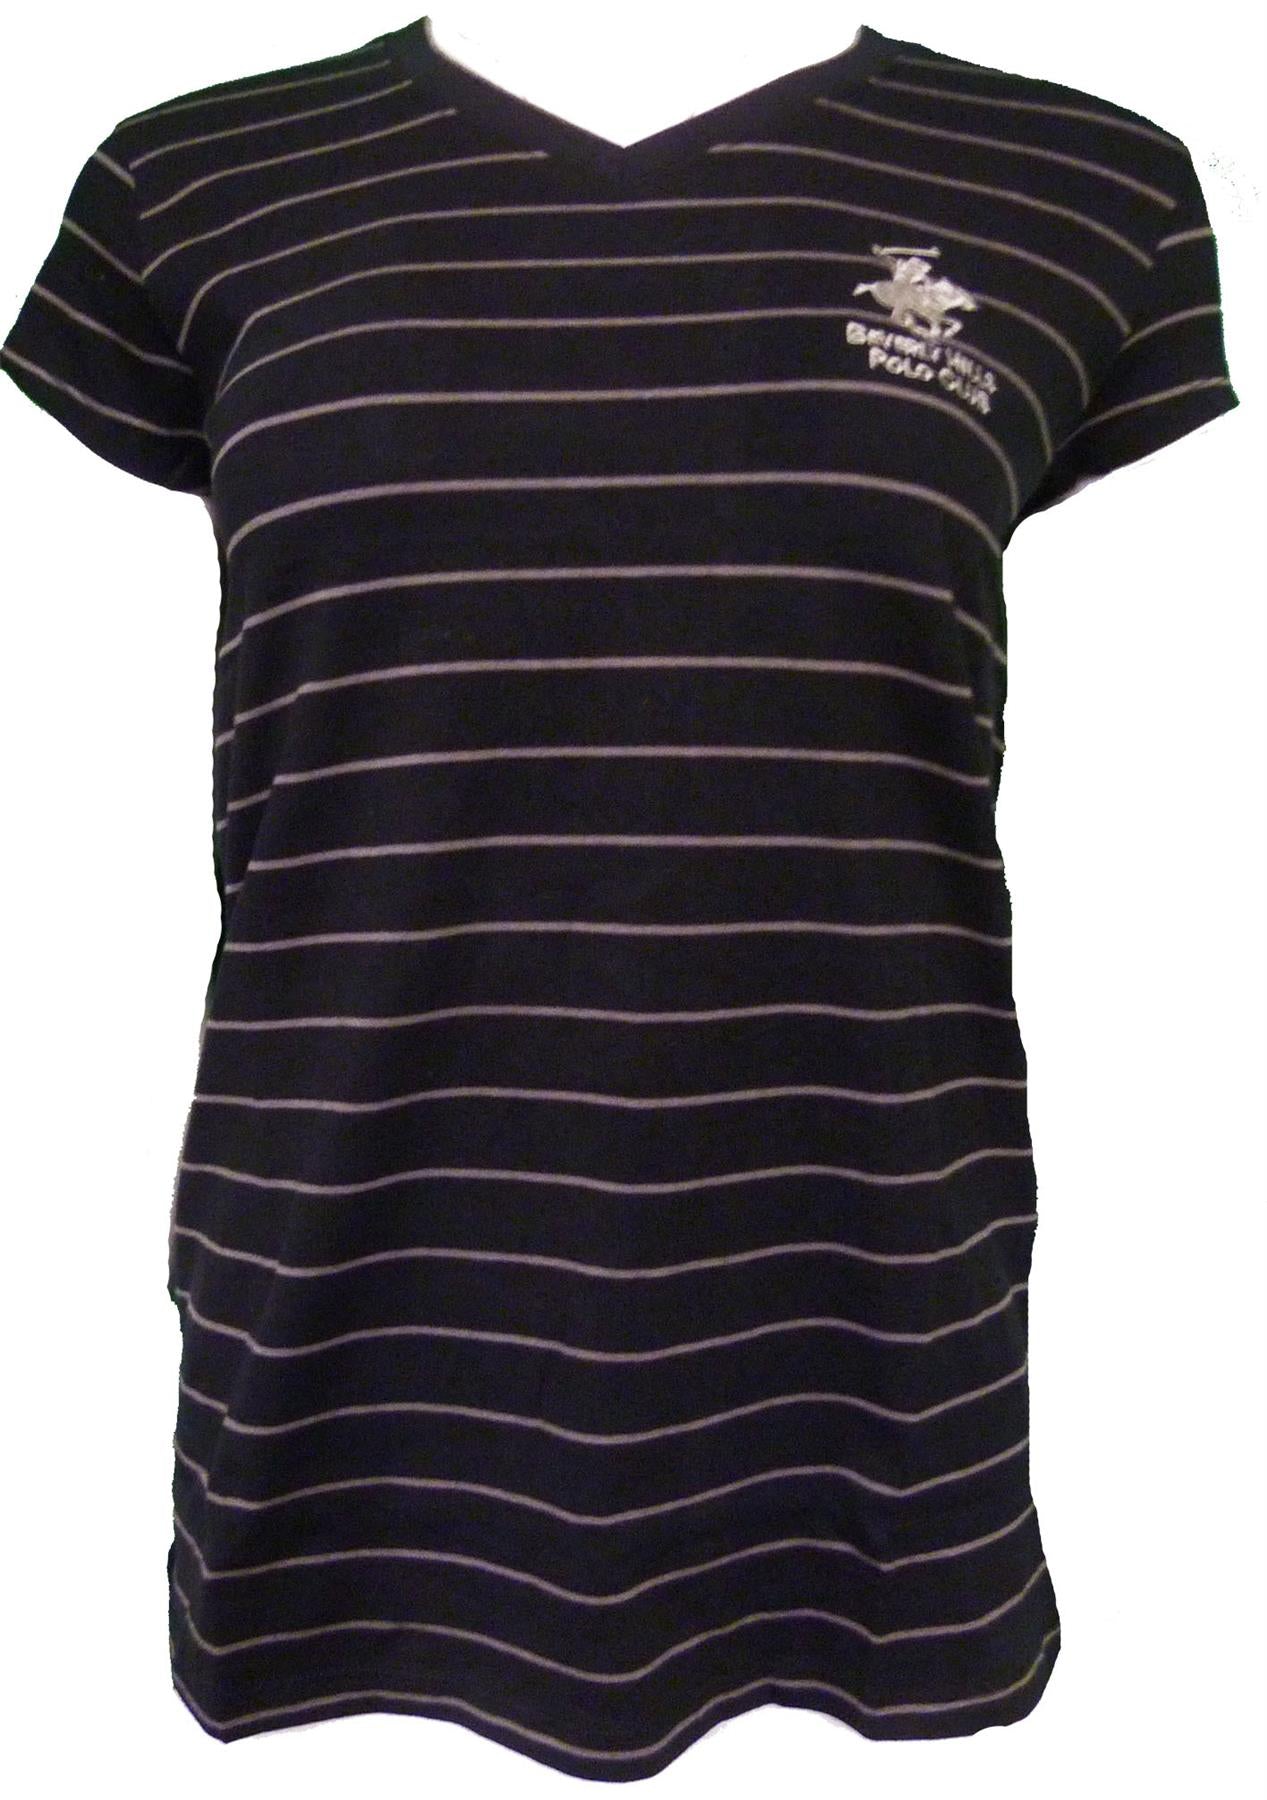 Beverly Hills Polo Club Women's Striped Athletic V-Neck T-Shirt Top